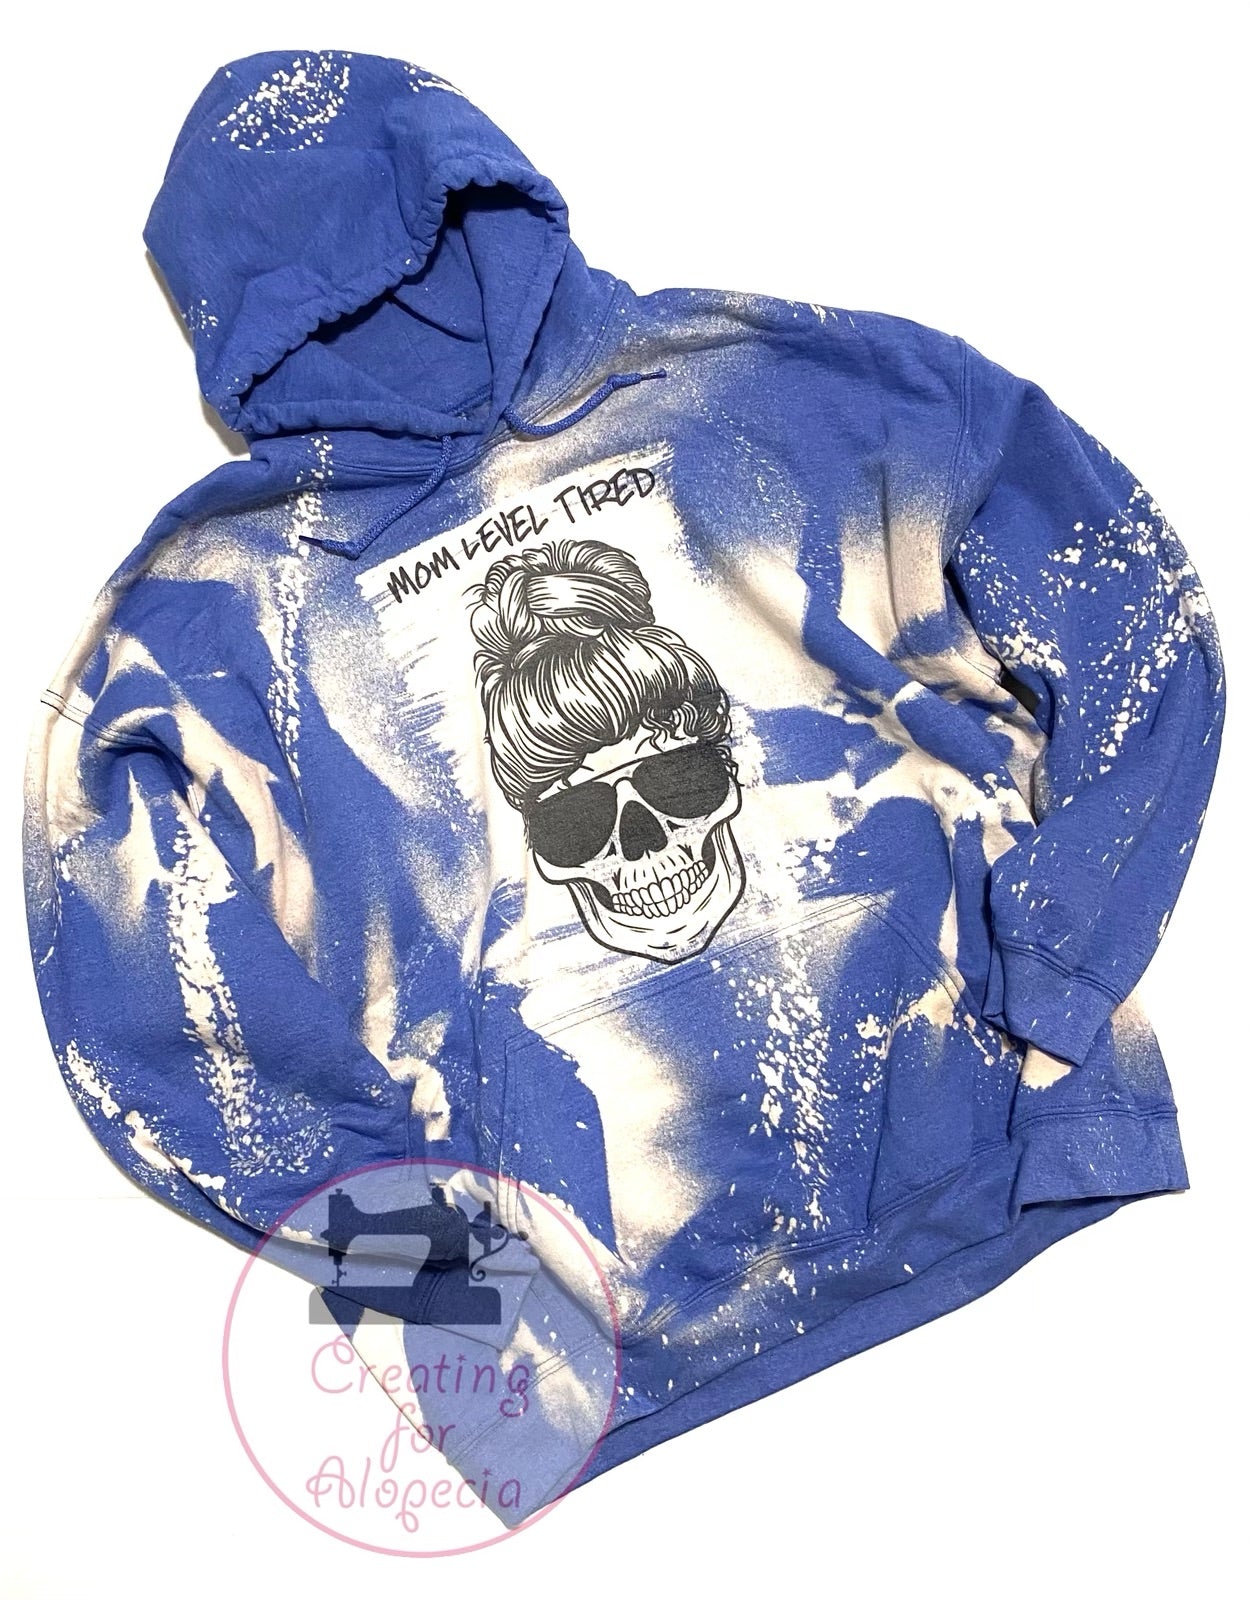 2XL “Mom Level Tired” Sublimation Hoodie